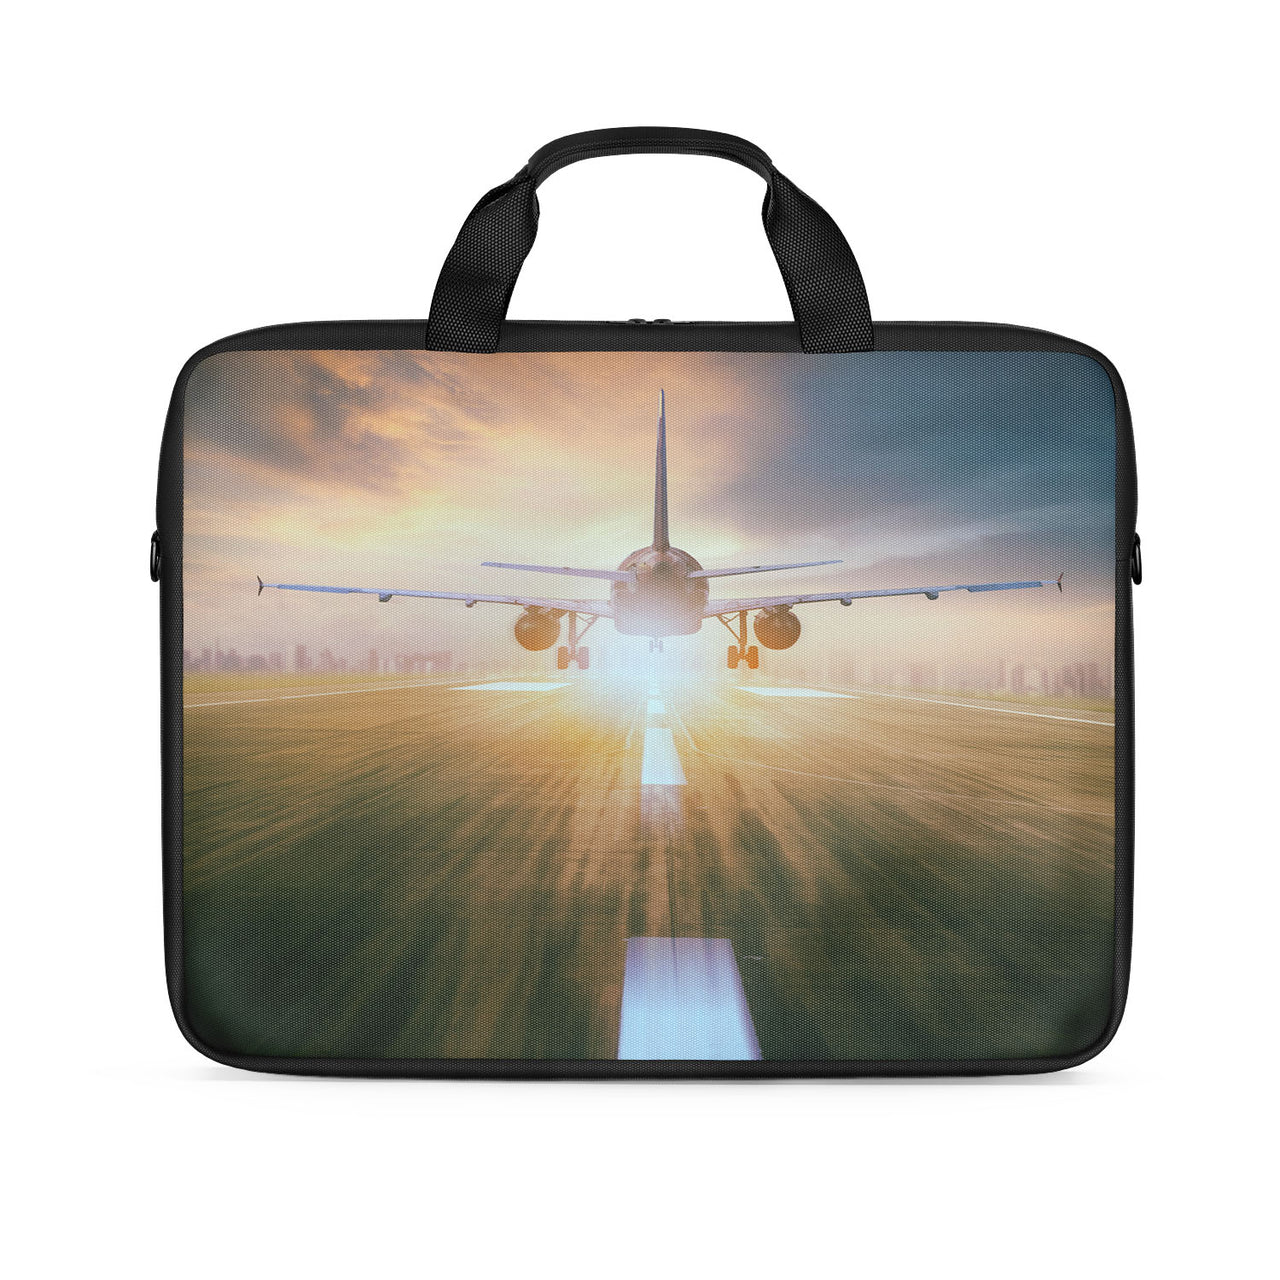 Airplane Flying Over Runway Designed Laptop & Tablet Bags